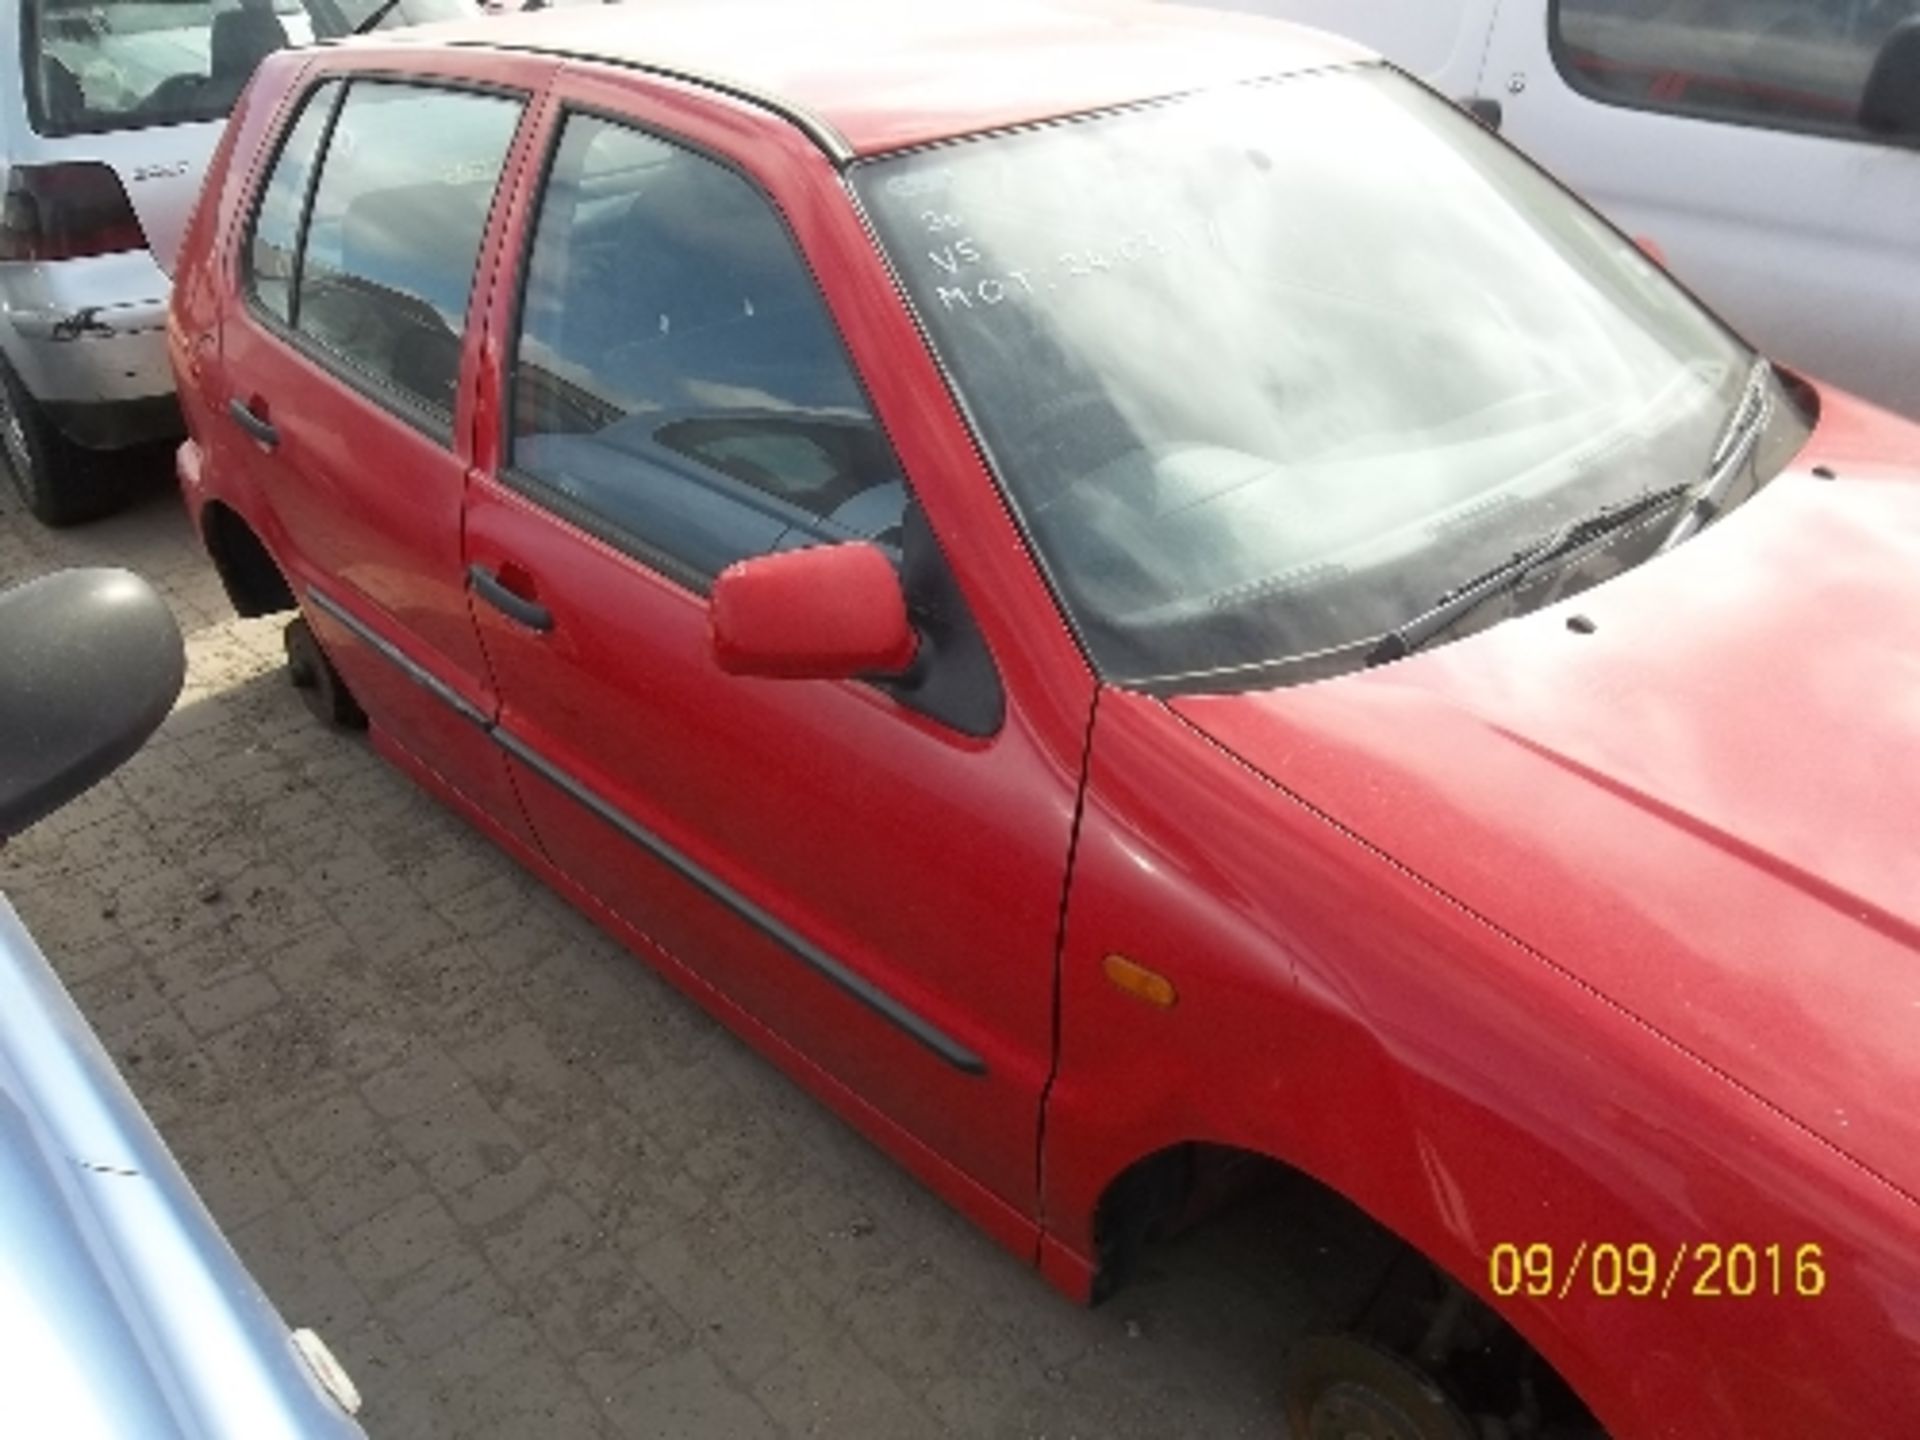 Volkswagen Polo 1.4 CL - T480 RWV Date of registration: 02.03.1999 1390cc, petrol, manual, red - Image 2 of 4